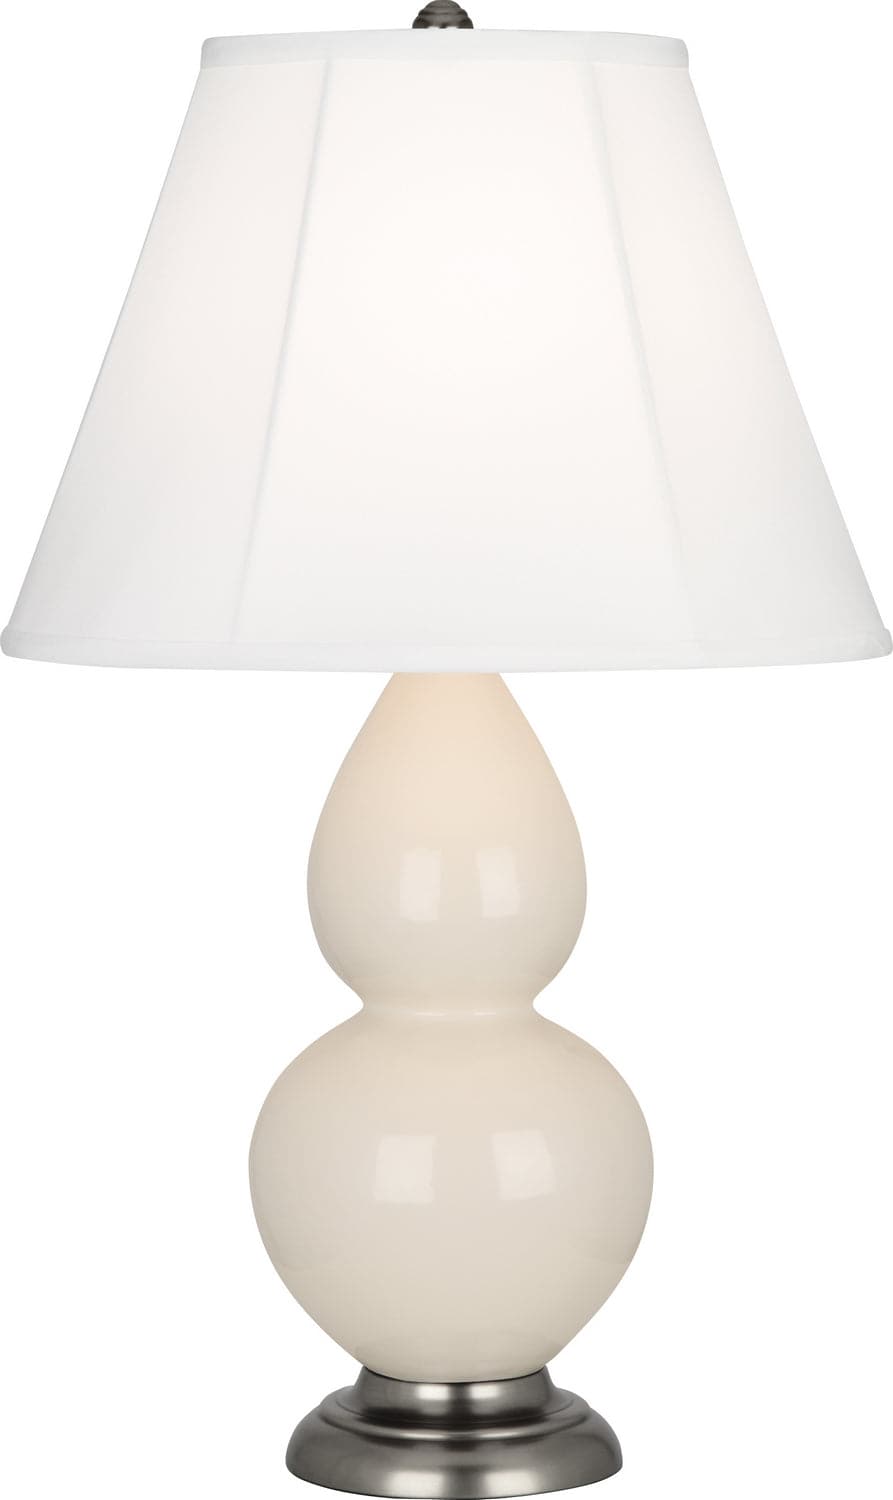 Robert Abbey - 1776 - One Light Accent Lamp - Small Double Gourd - Bone Glazed